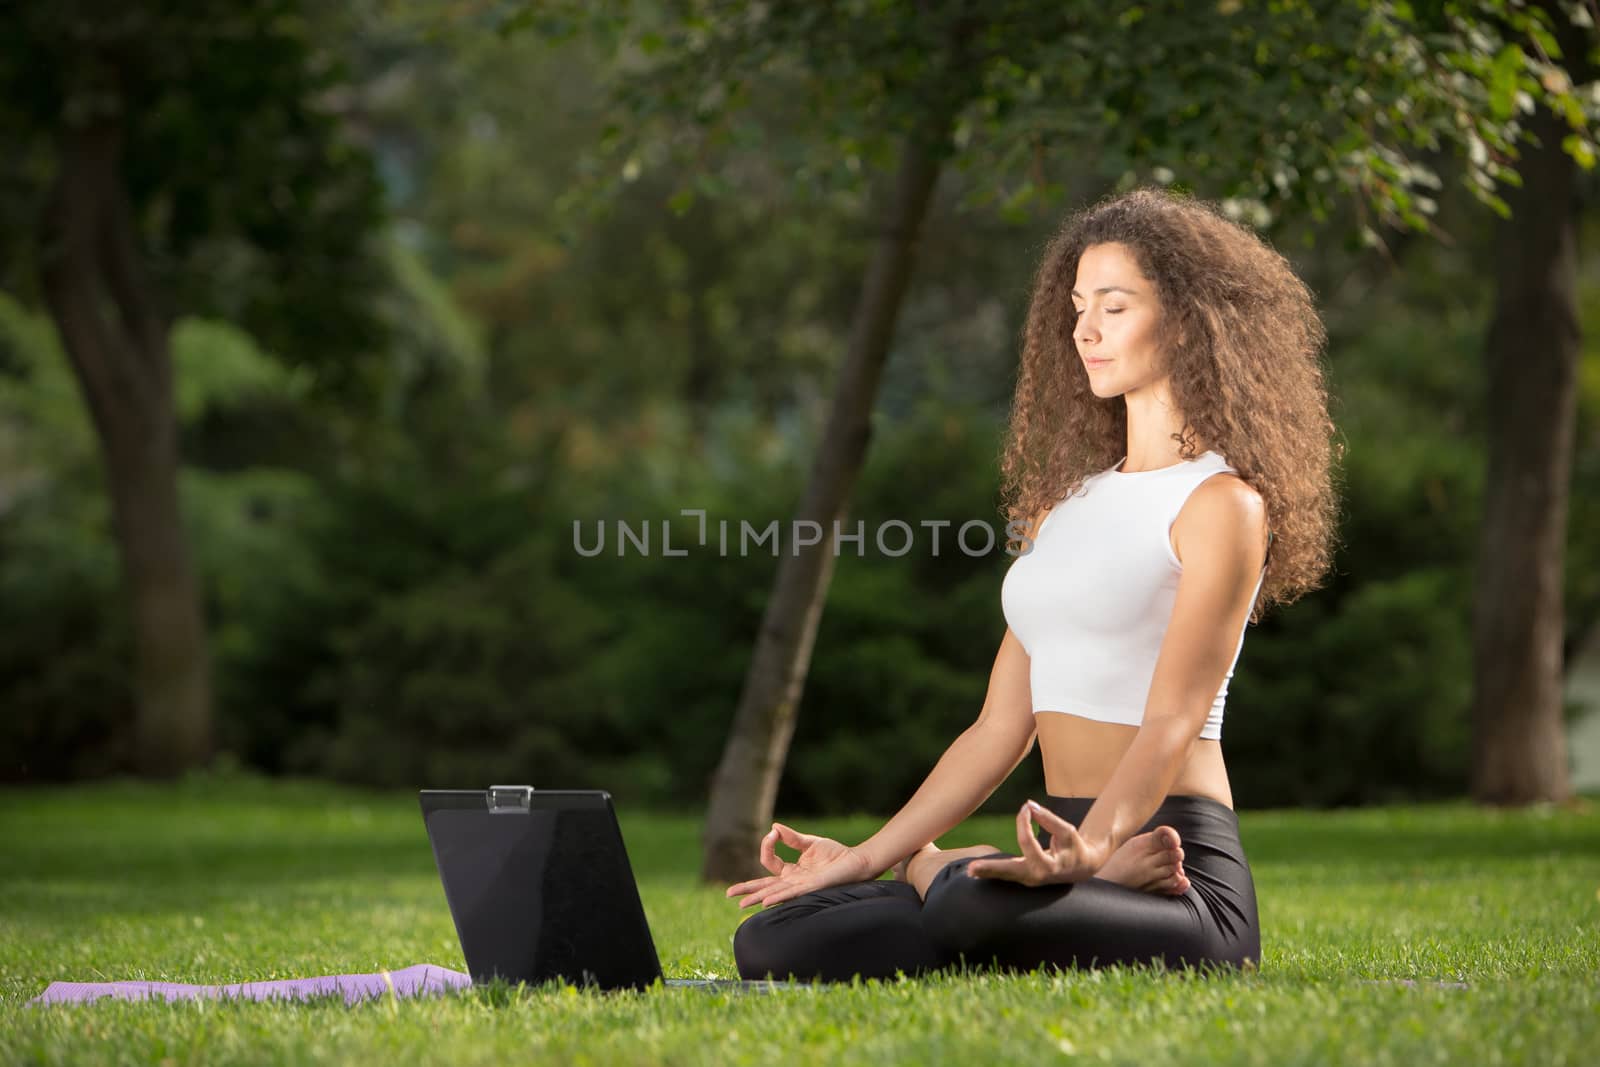 Pretty woman doing yoga exercises in outdoor park,  green grass background 